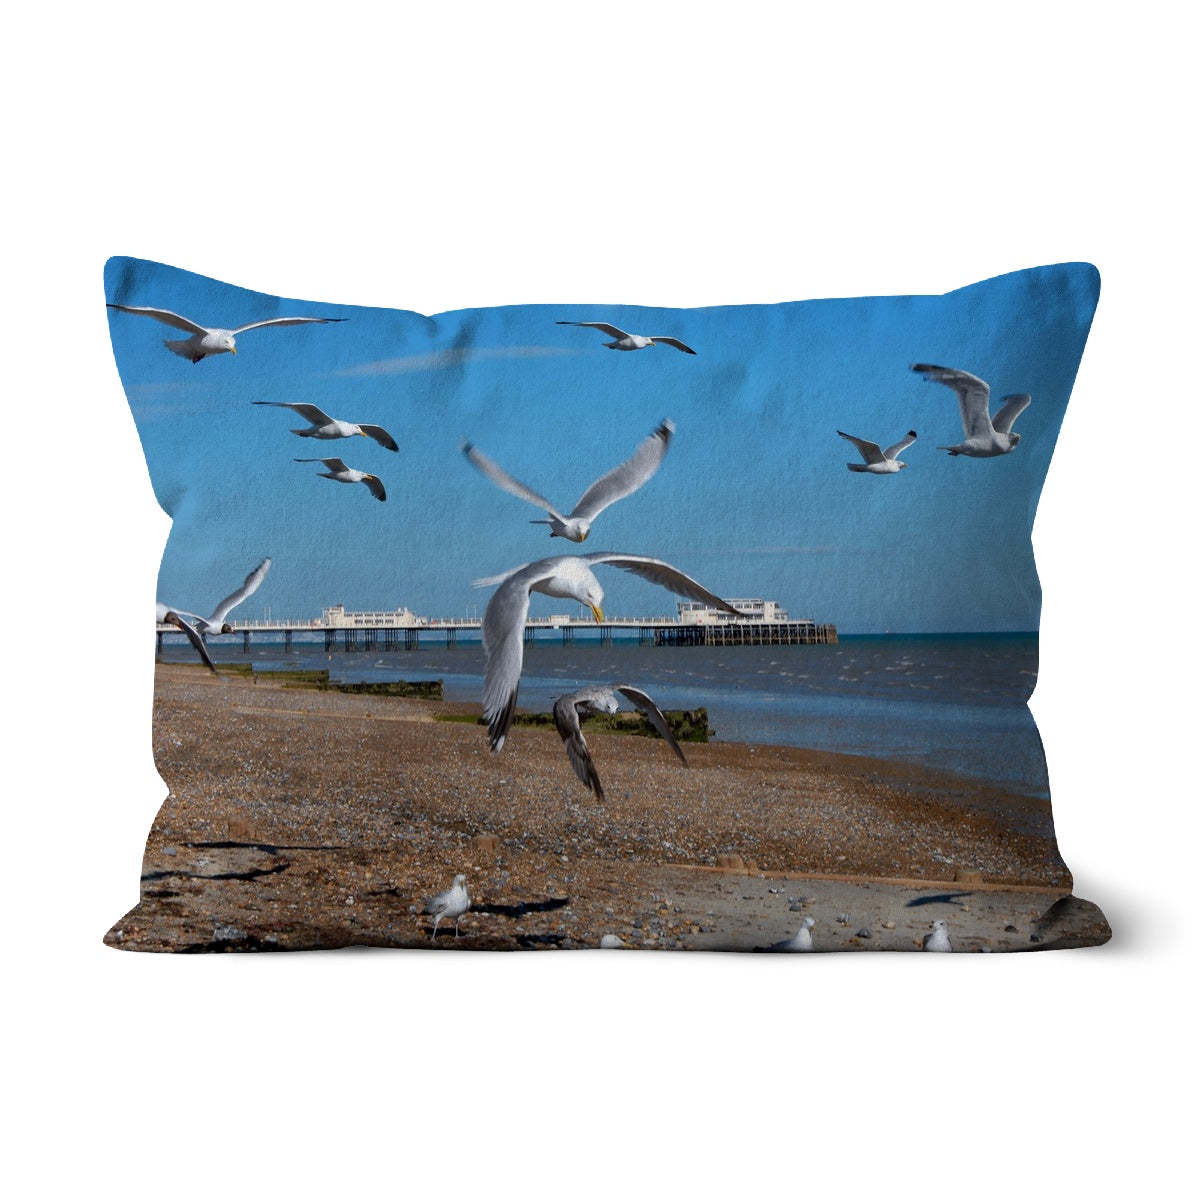 Worthing Pier From The West By David Sawyer Cushion